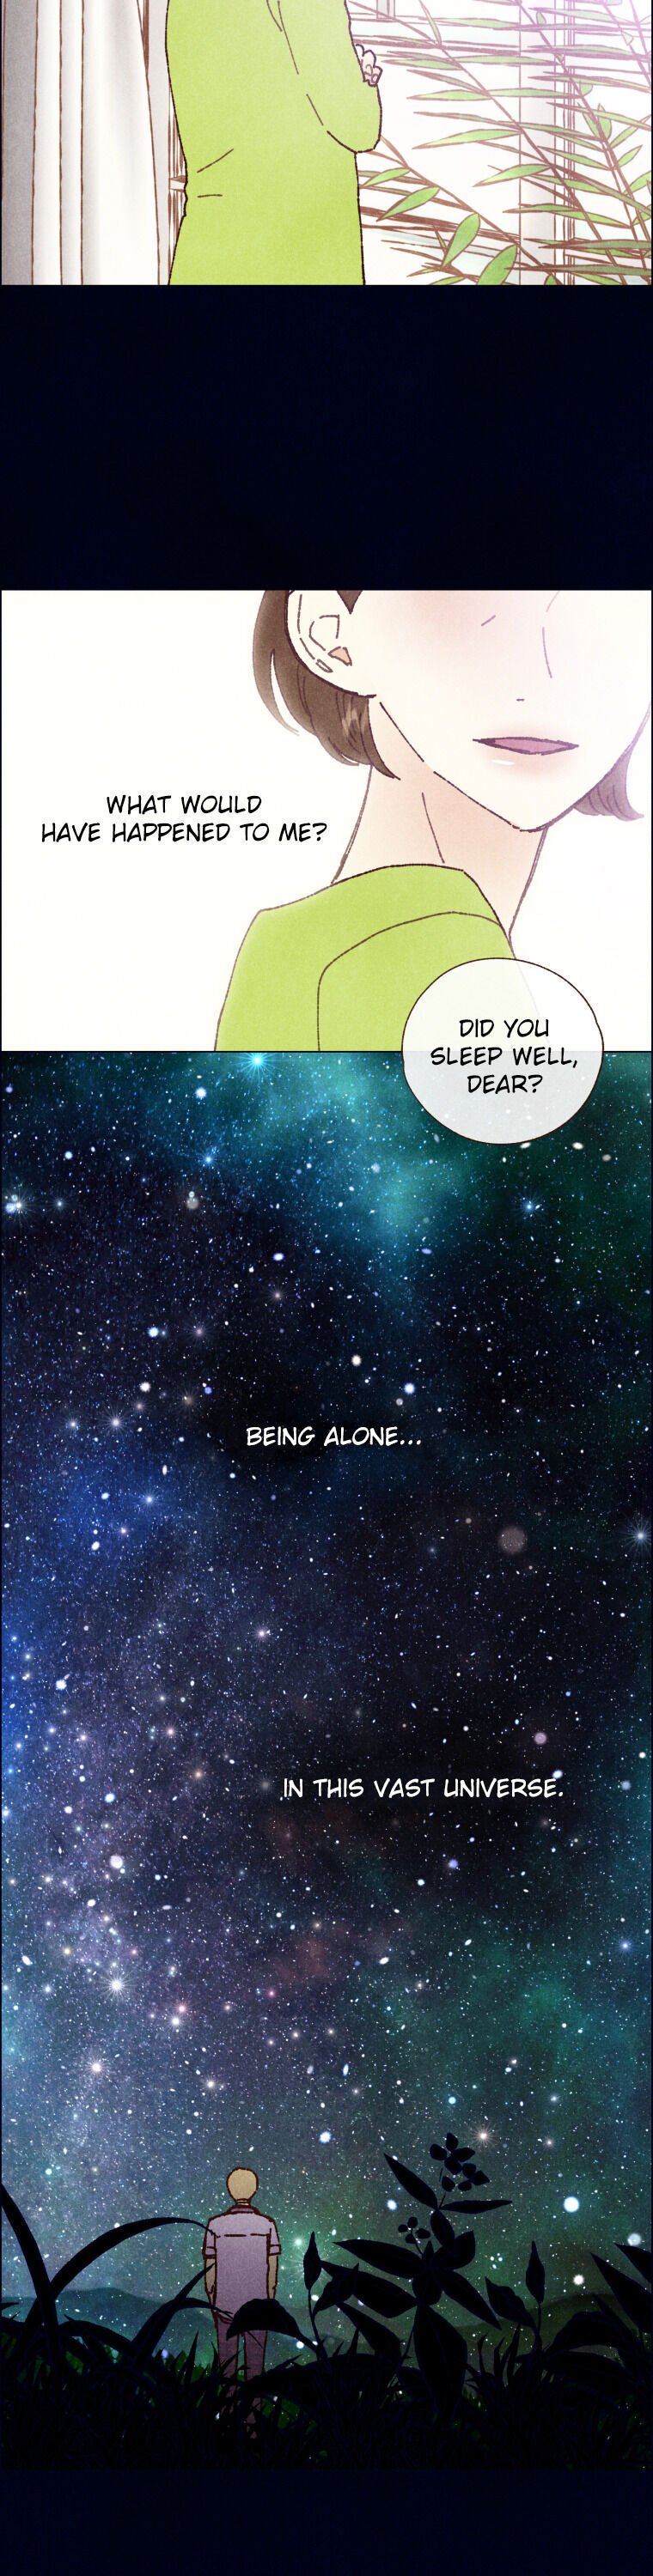 A Beloved Existence chapter 2